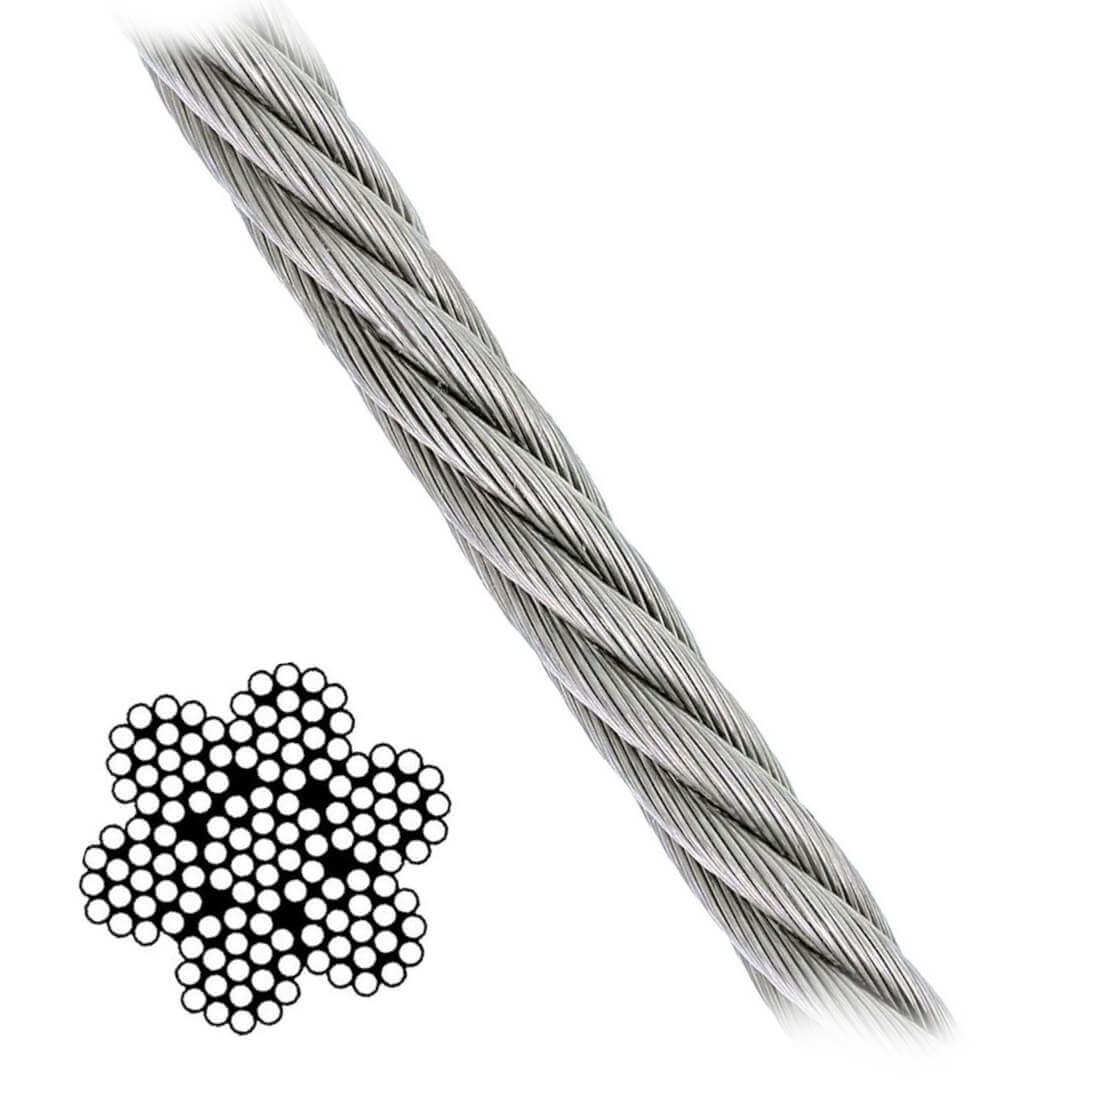 Galvanized aircraft cable available at Baremotion